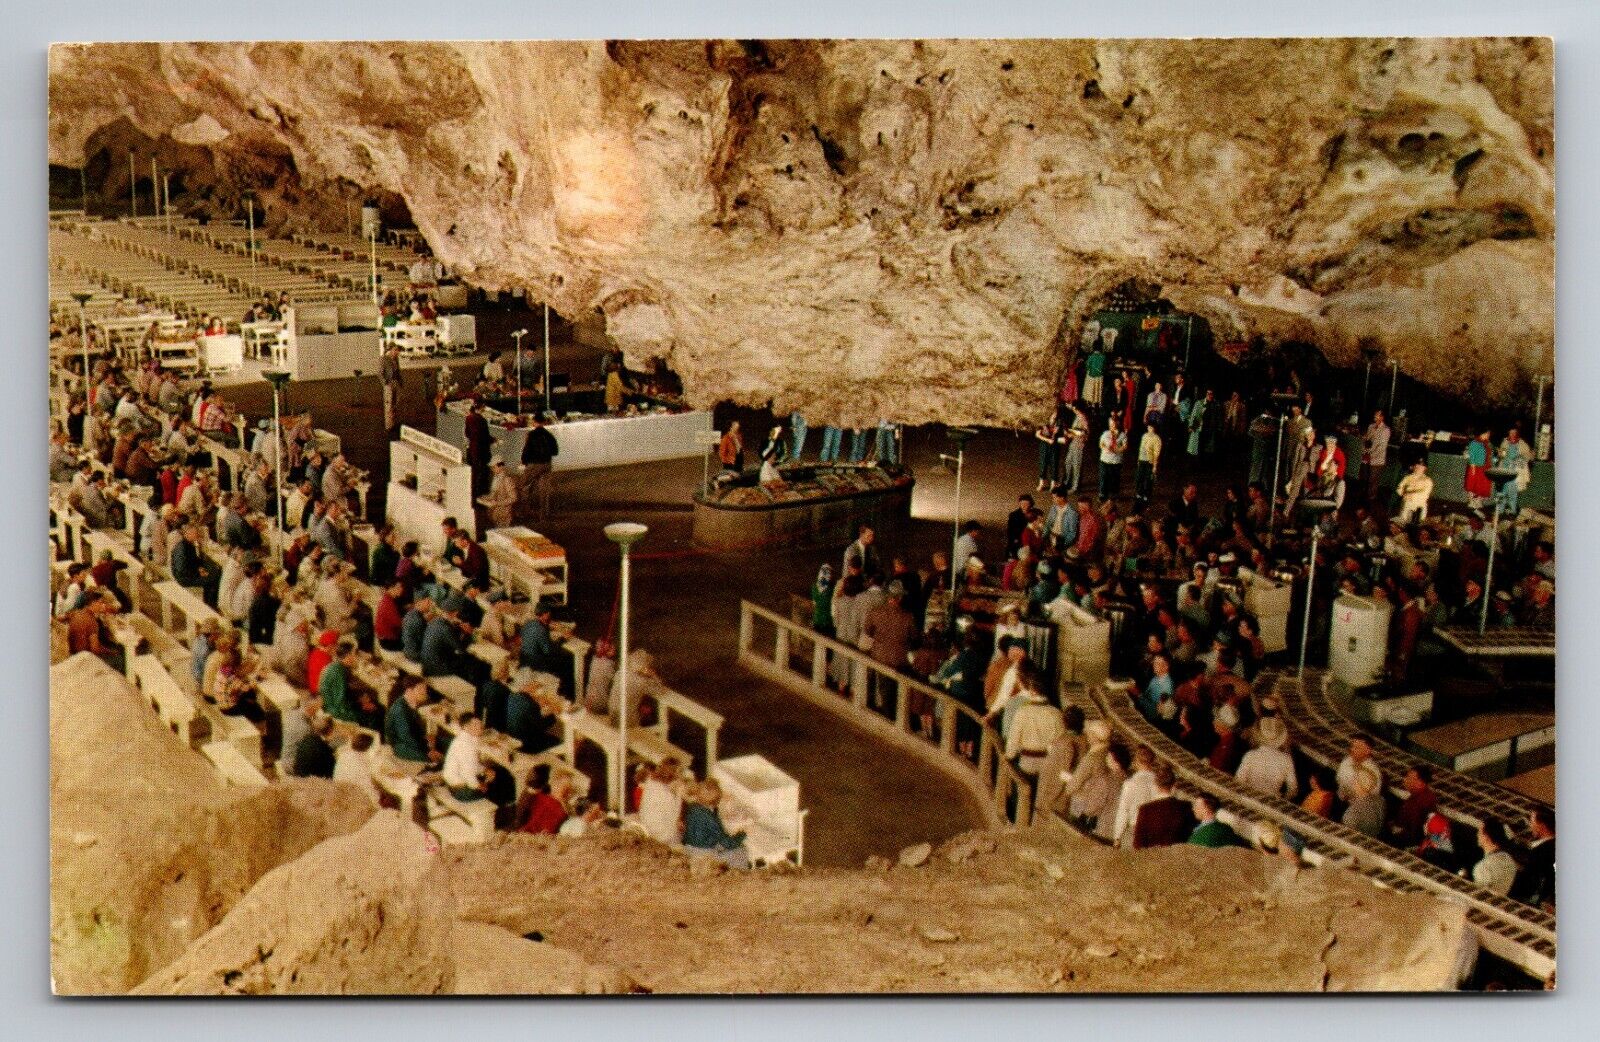 Lunchroom Carlsbad Caverns National Park New Mexico Vintage Unposted Postcard